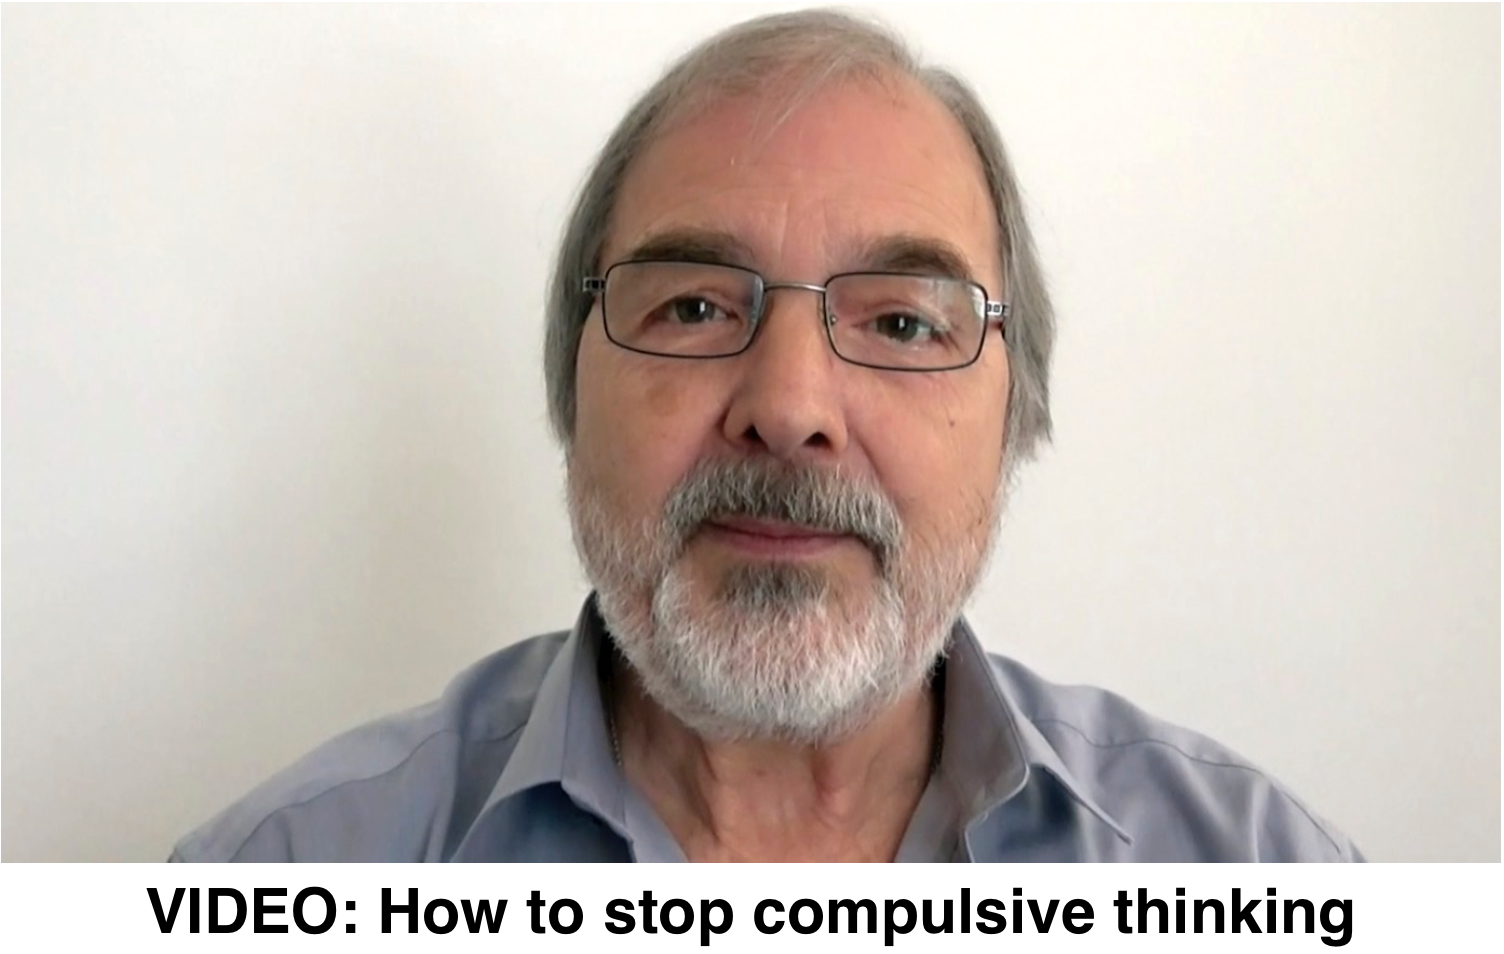 How to stop thinking